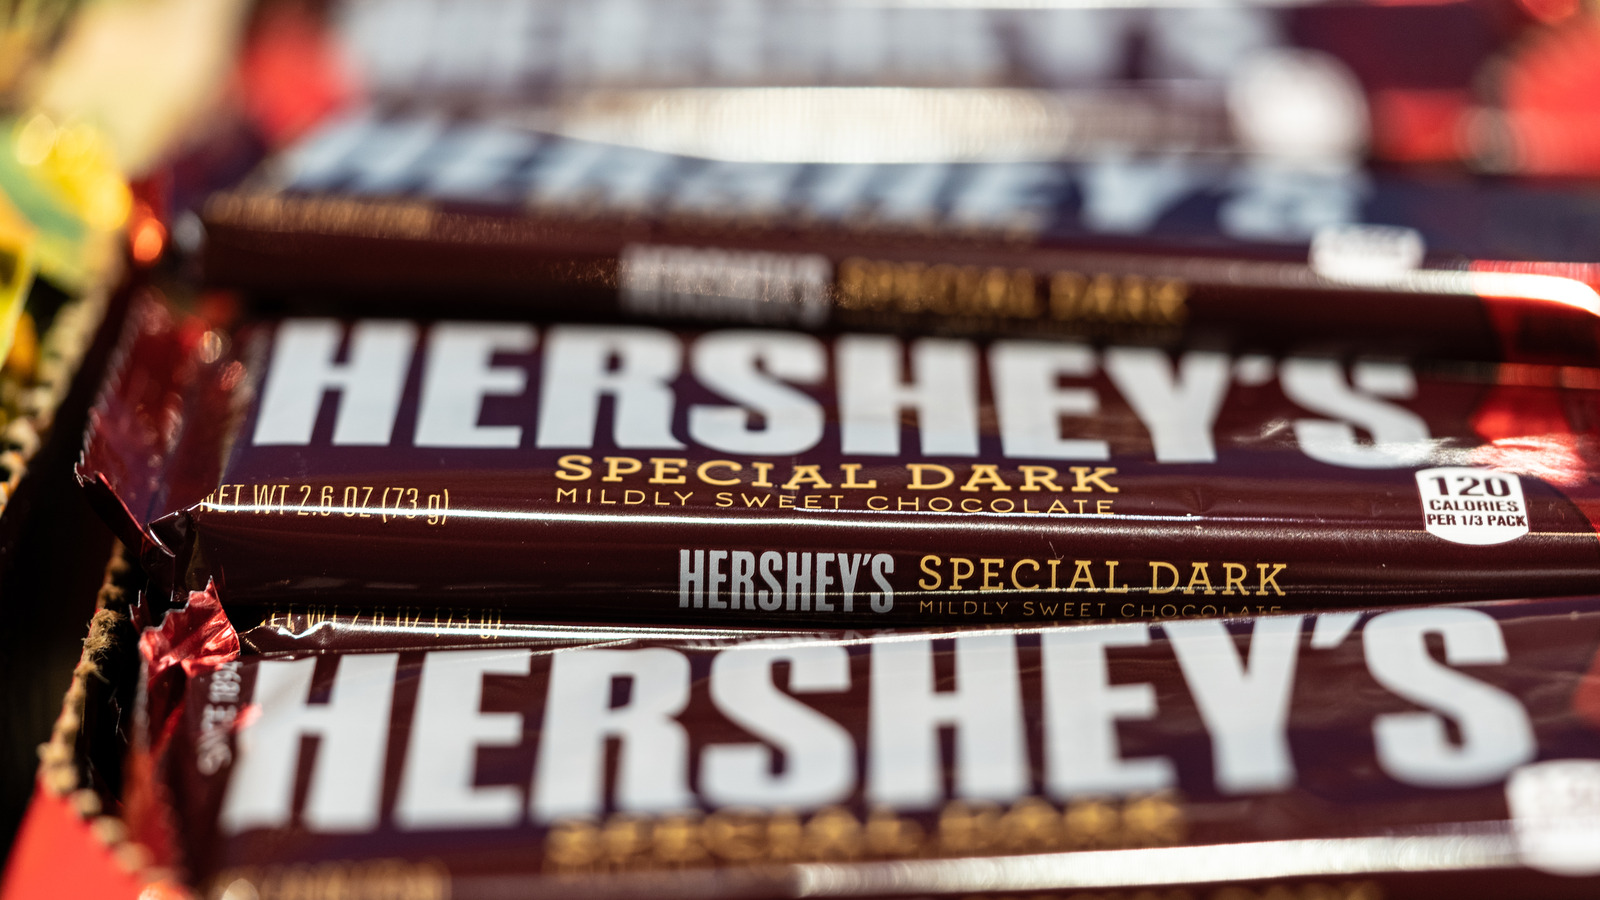 Hershey Is Facing A Federal Lawsuit Over Lead Concerns